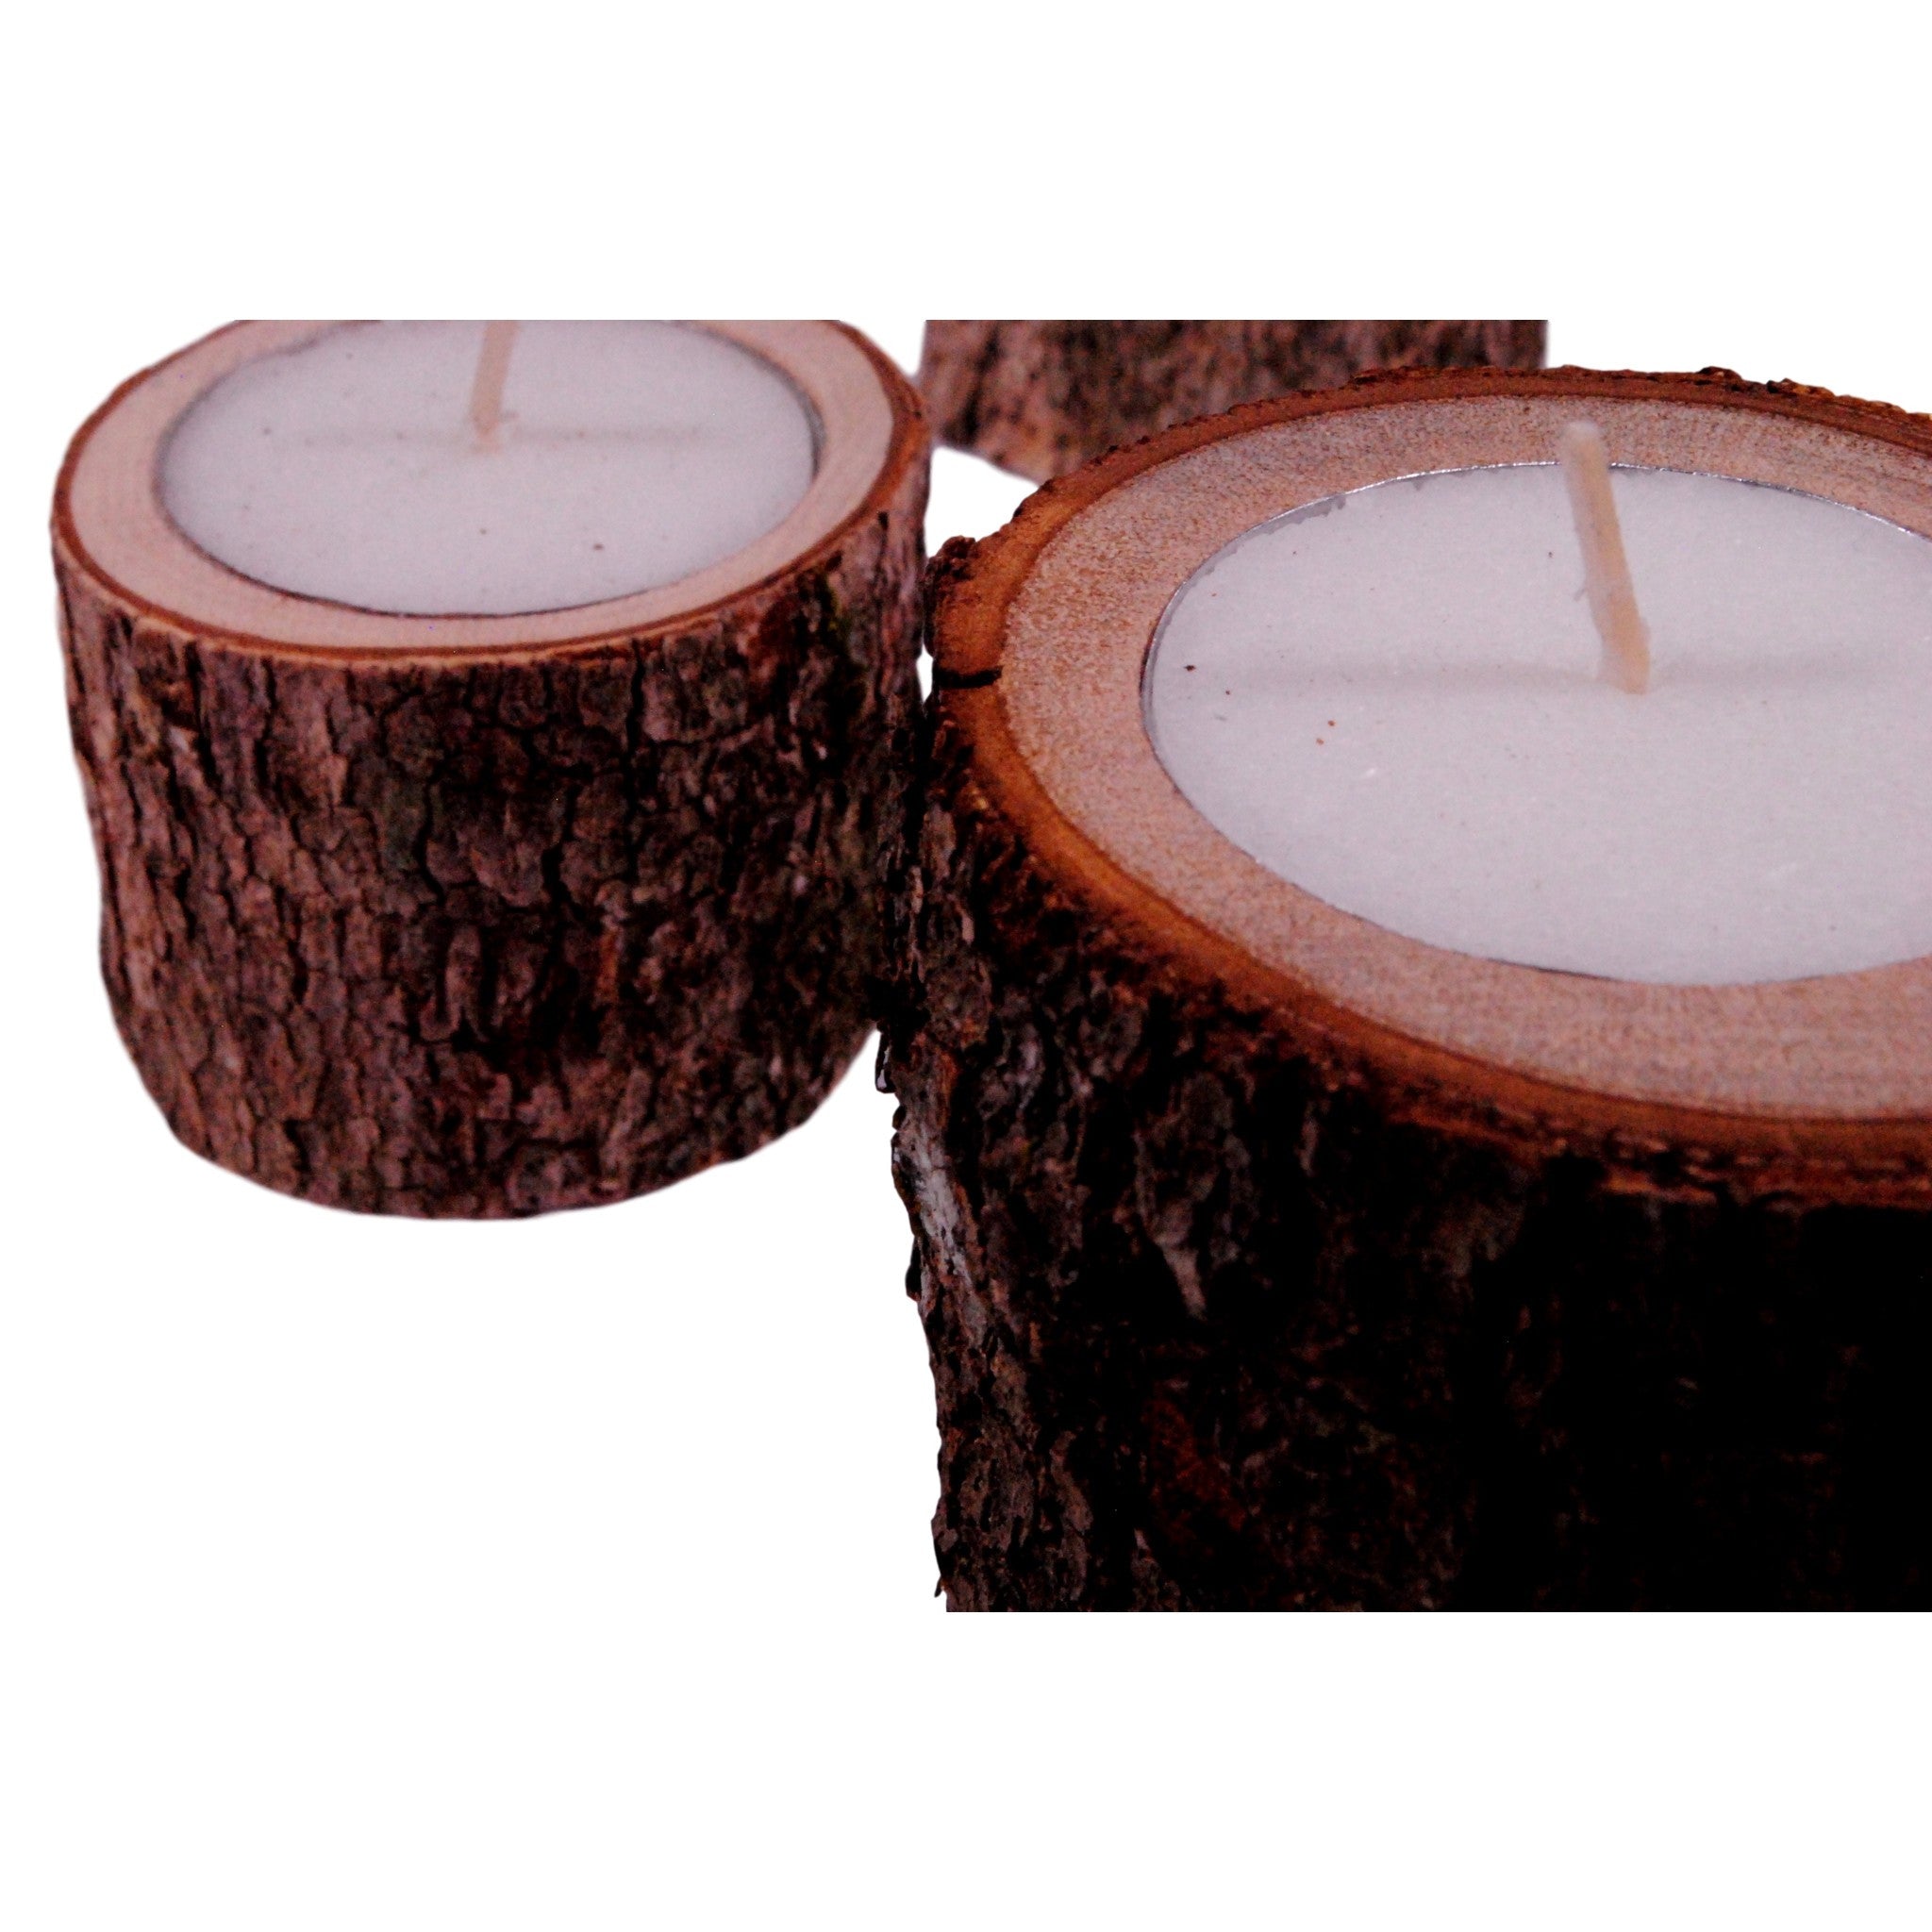 Tree Candles - set of 3